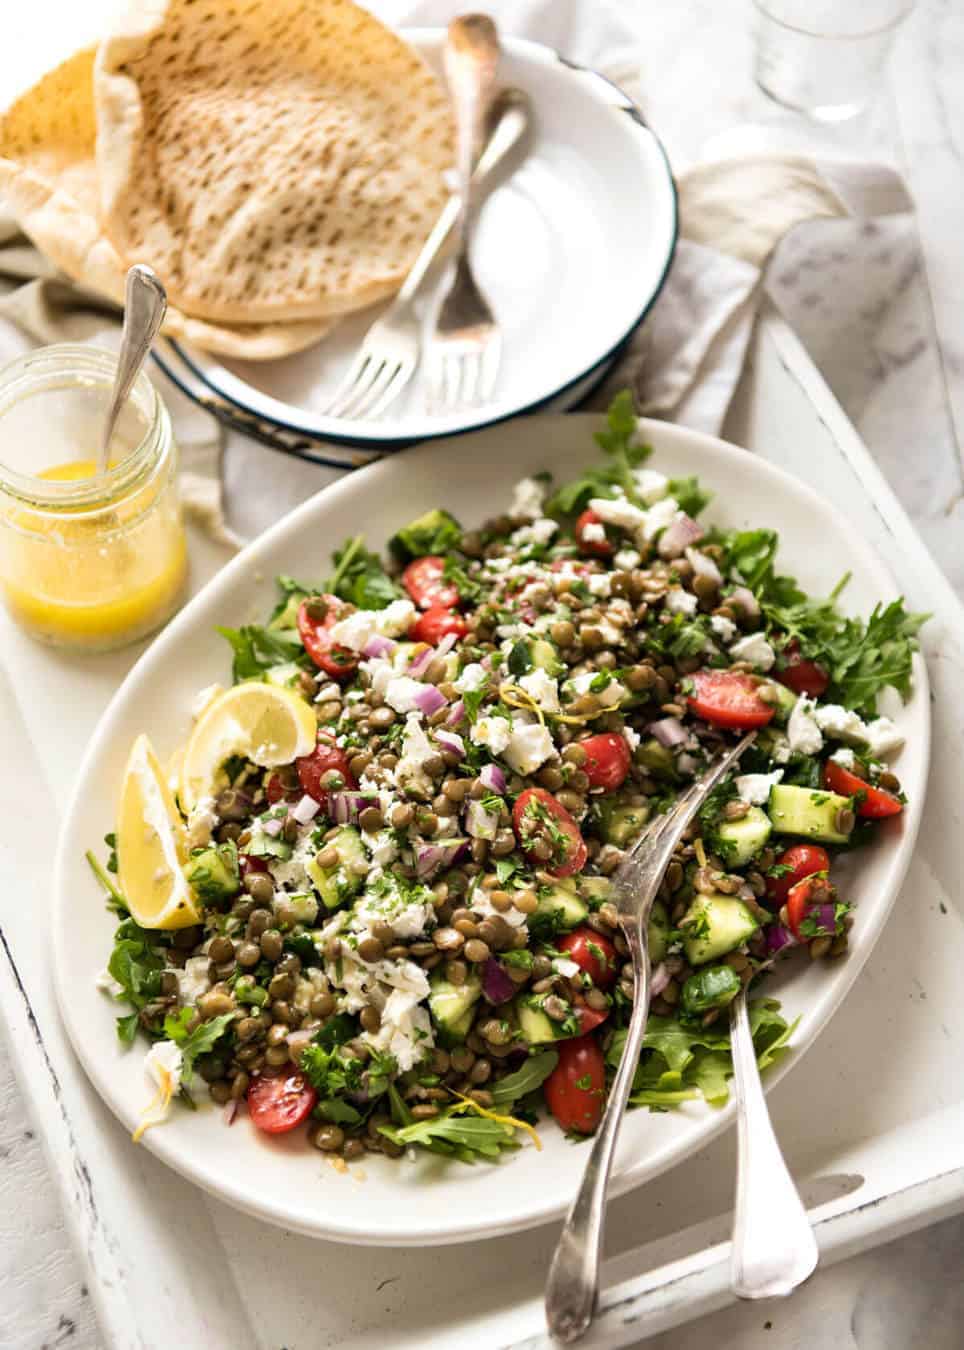 Can't-Stop-Eating-It Lentil Salad! Secret: Cook lentils in a simple flavoured broth or marinated canned lentils. recipetineats.com